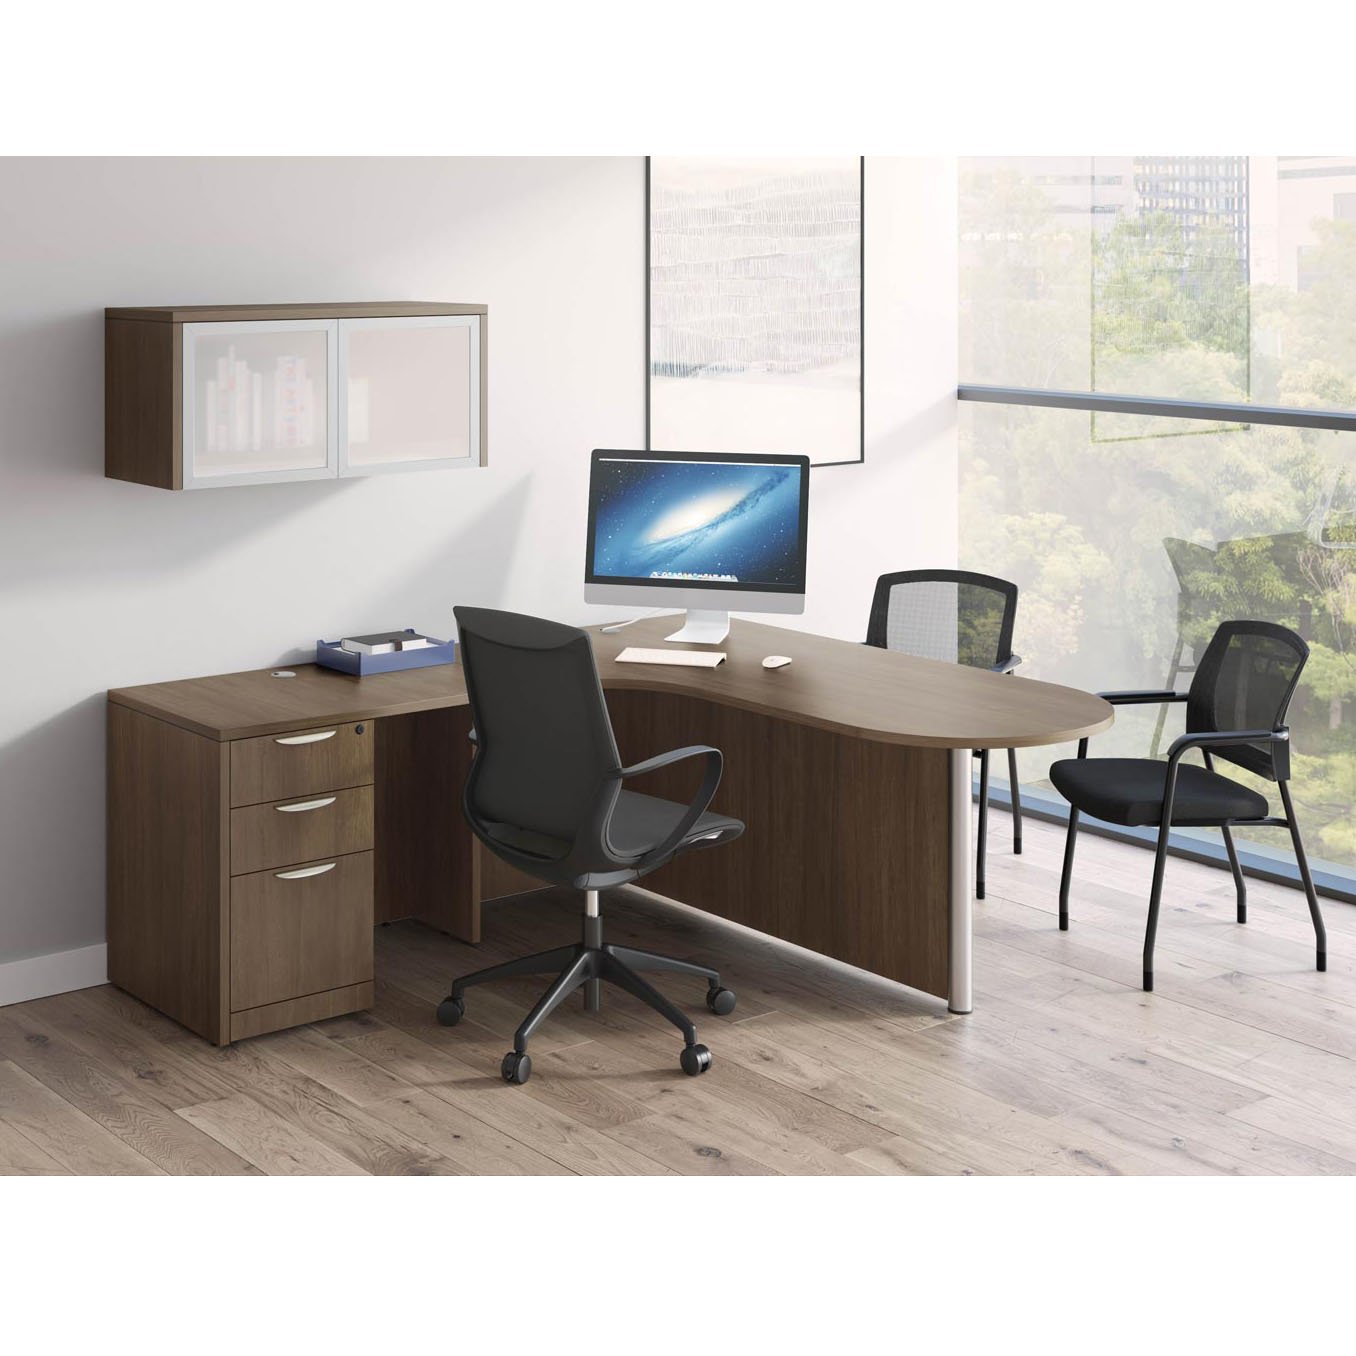 Office Desk With Radial Bullet Top